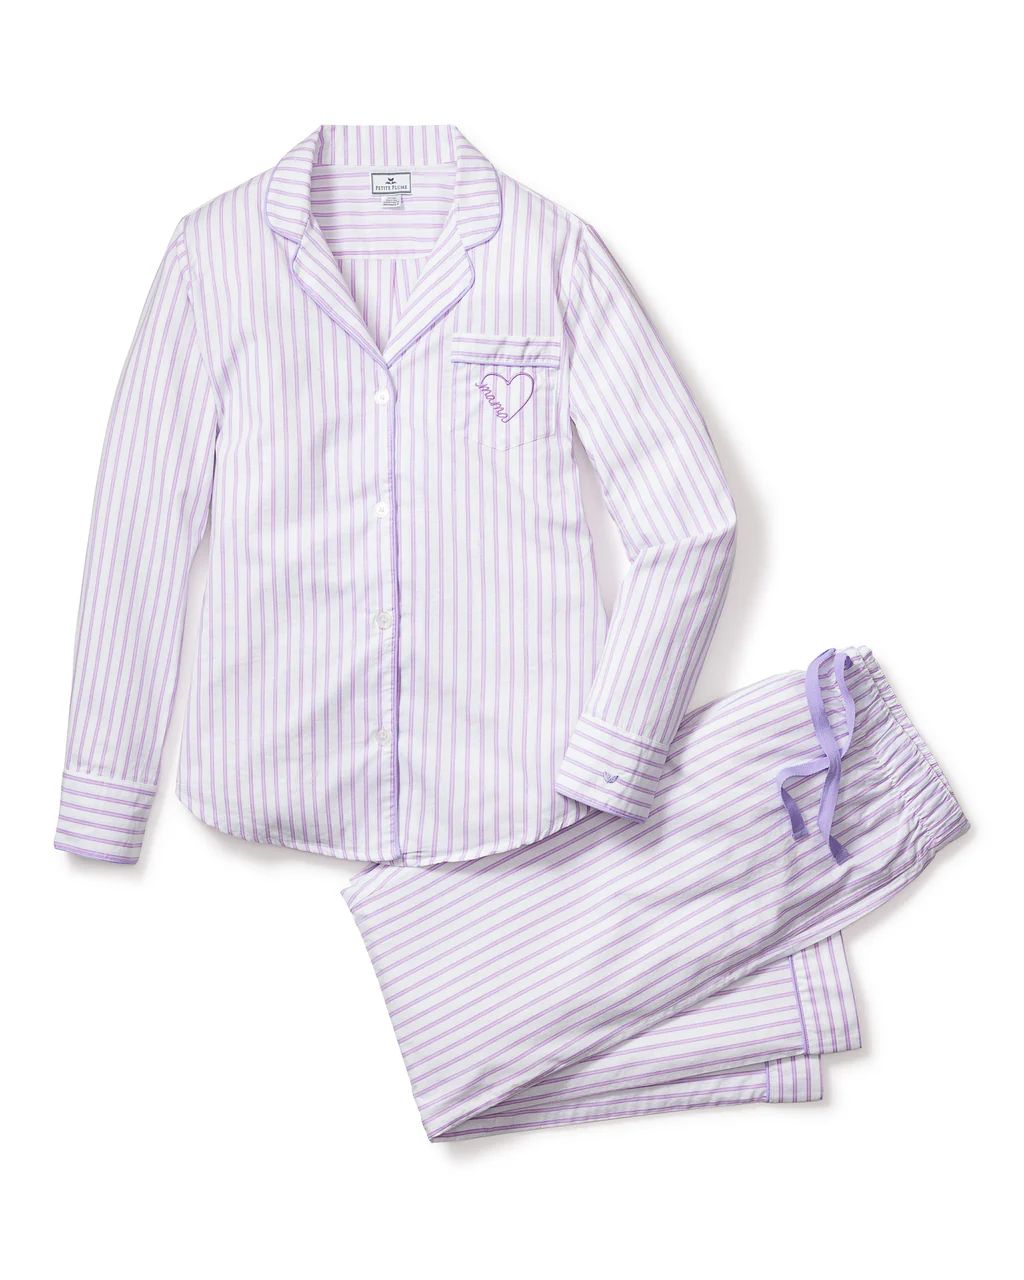 Women's Twill Lavender French Ticking Pajama Set with Mama Embroidery | Petite Plume